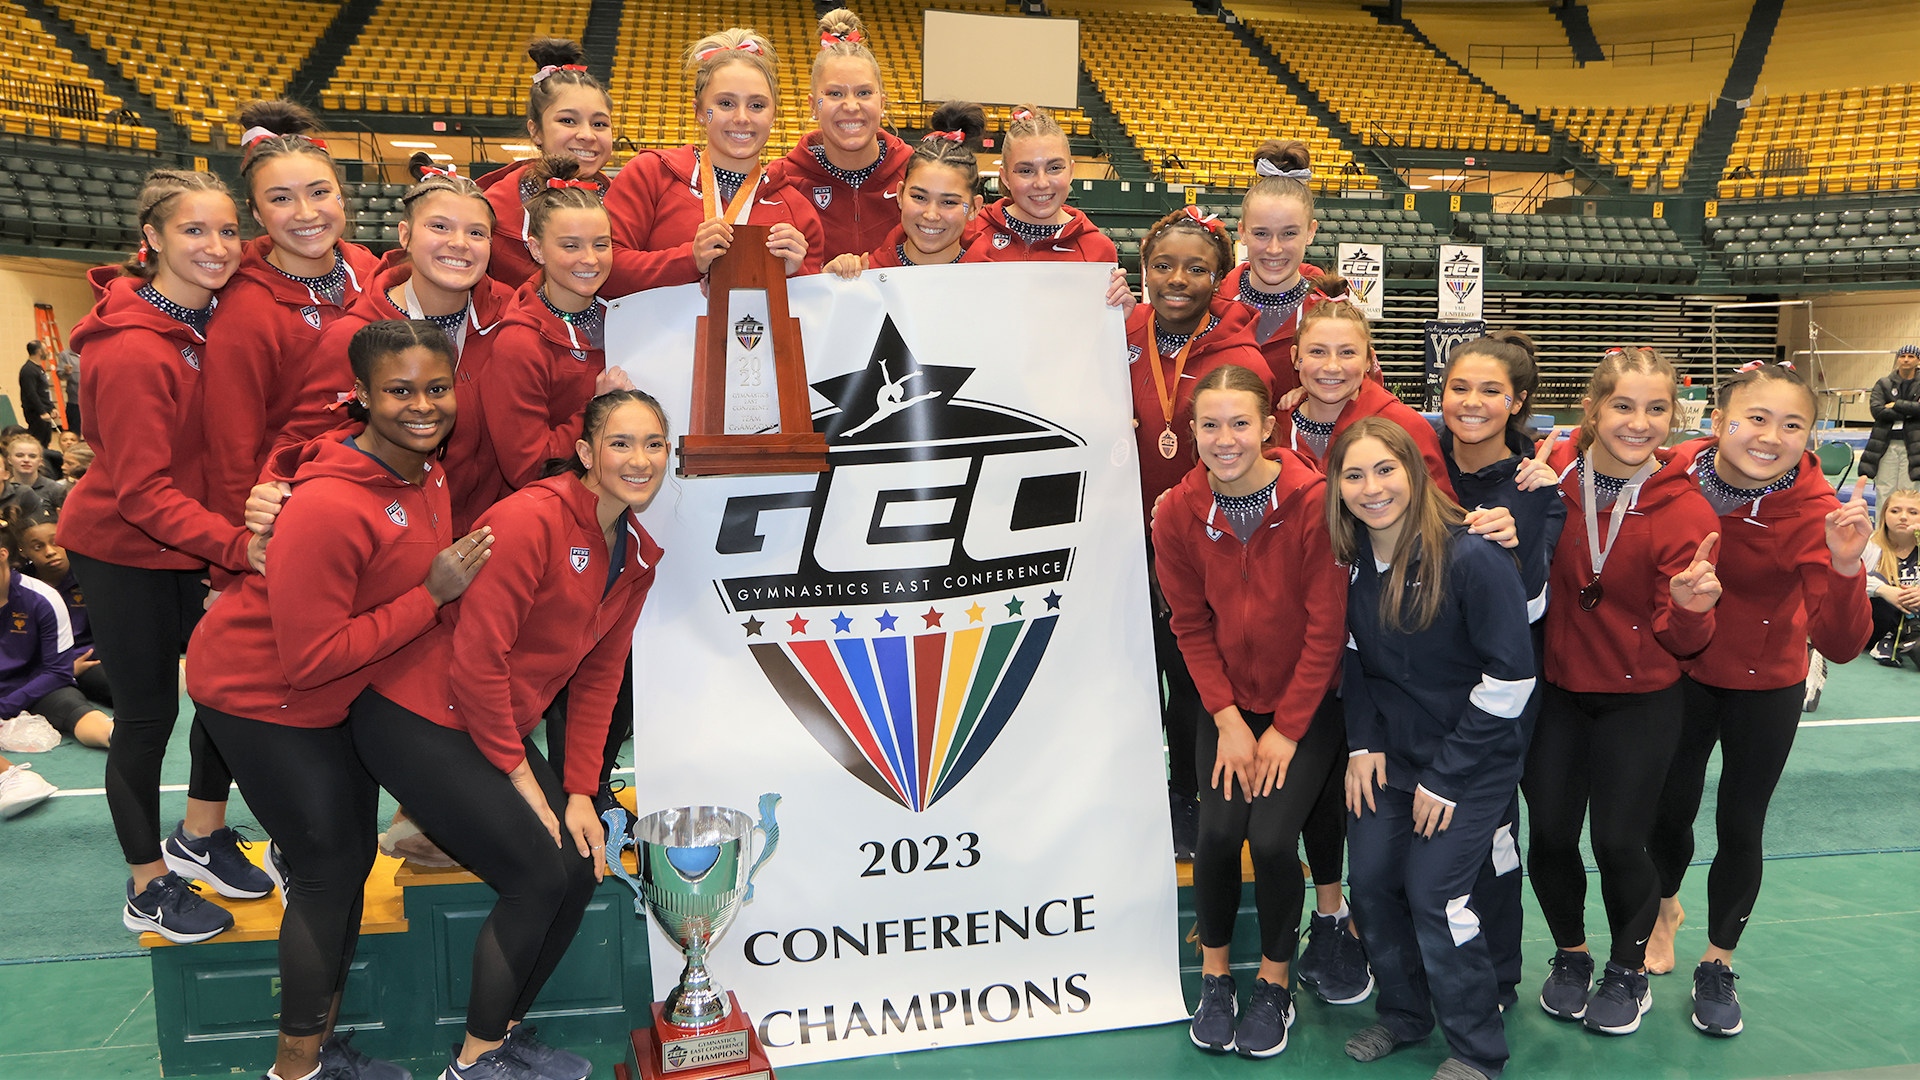 the gymnastics team members pose with trophy and GEC 2023 conference champions banner.